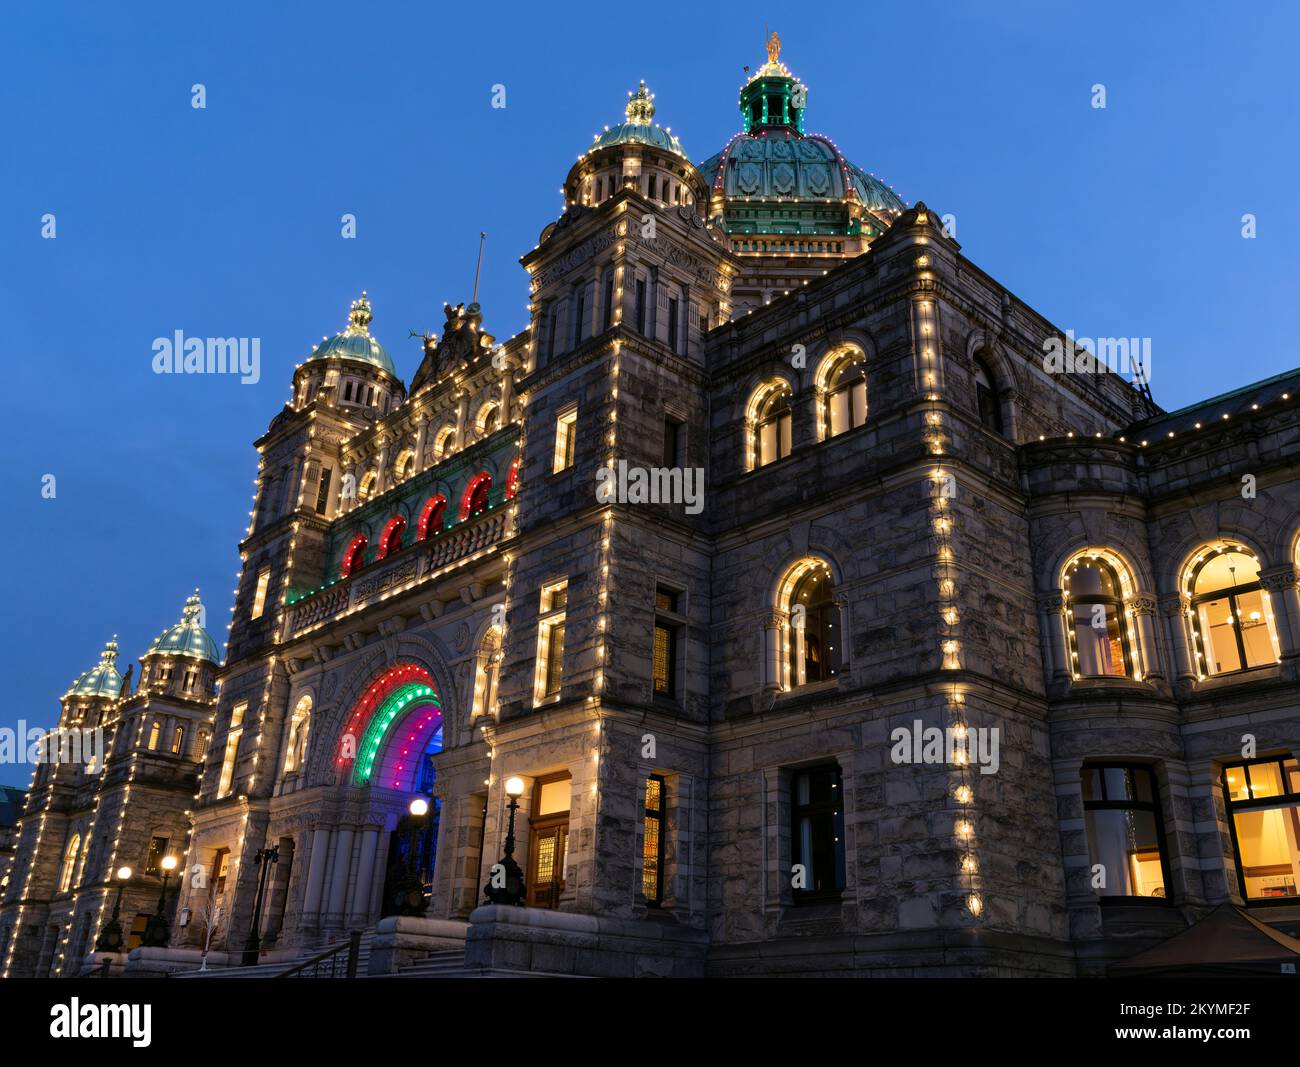 The British Columbia Parliament Buildings in Victoria, seen at dusk with holiday lights. Stock Photo